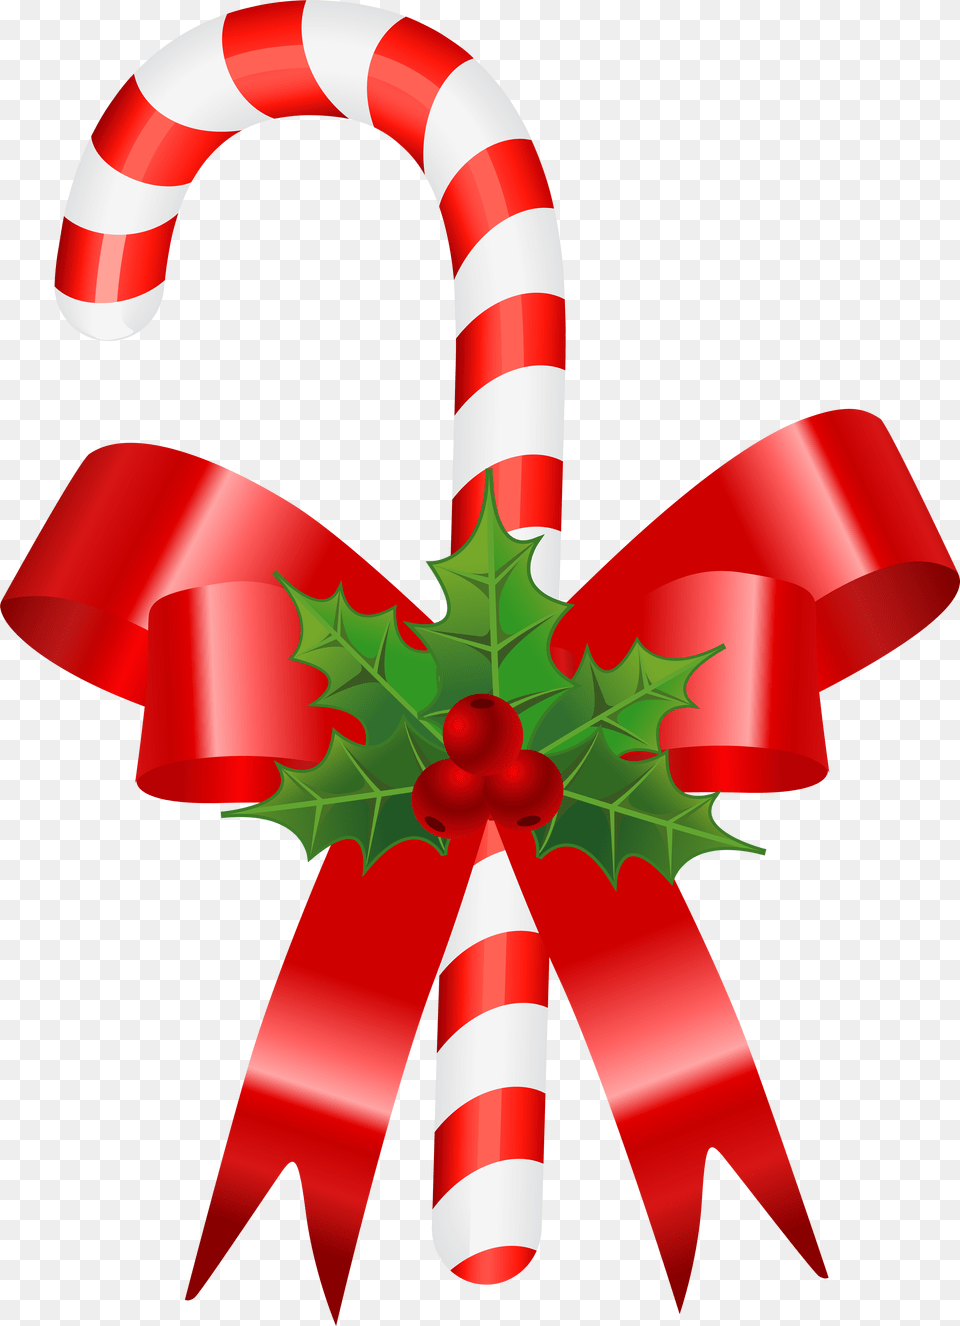 Candy Cane Transparent Christmas Candy Cane Transparent Background, Food, Sweets, Dynamite, Weapon Png